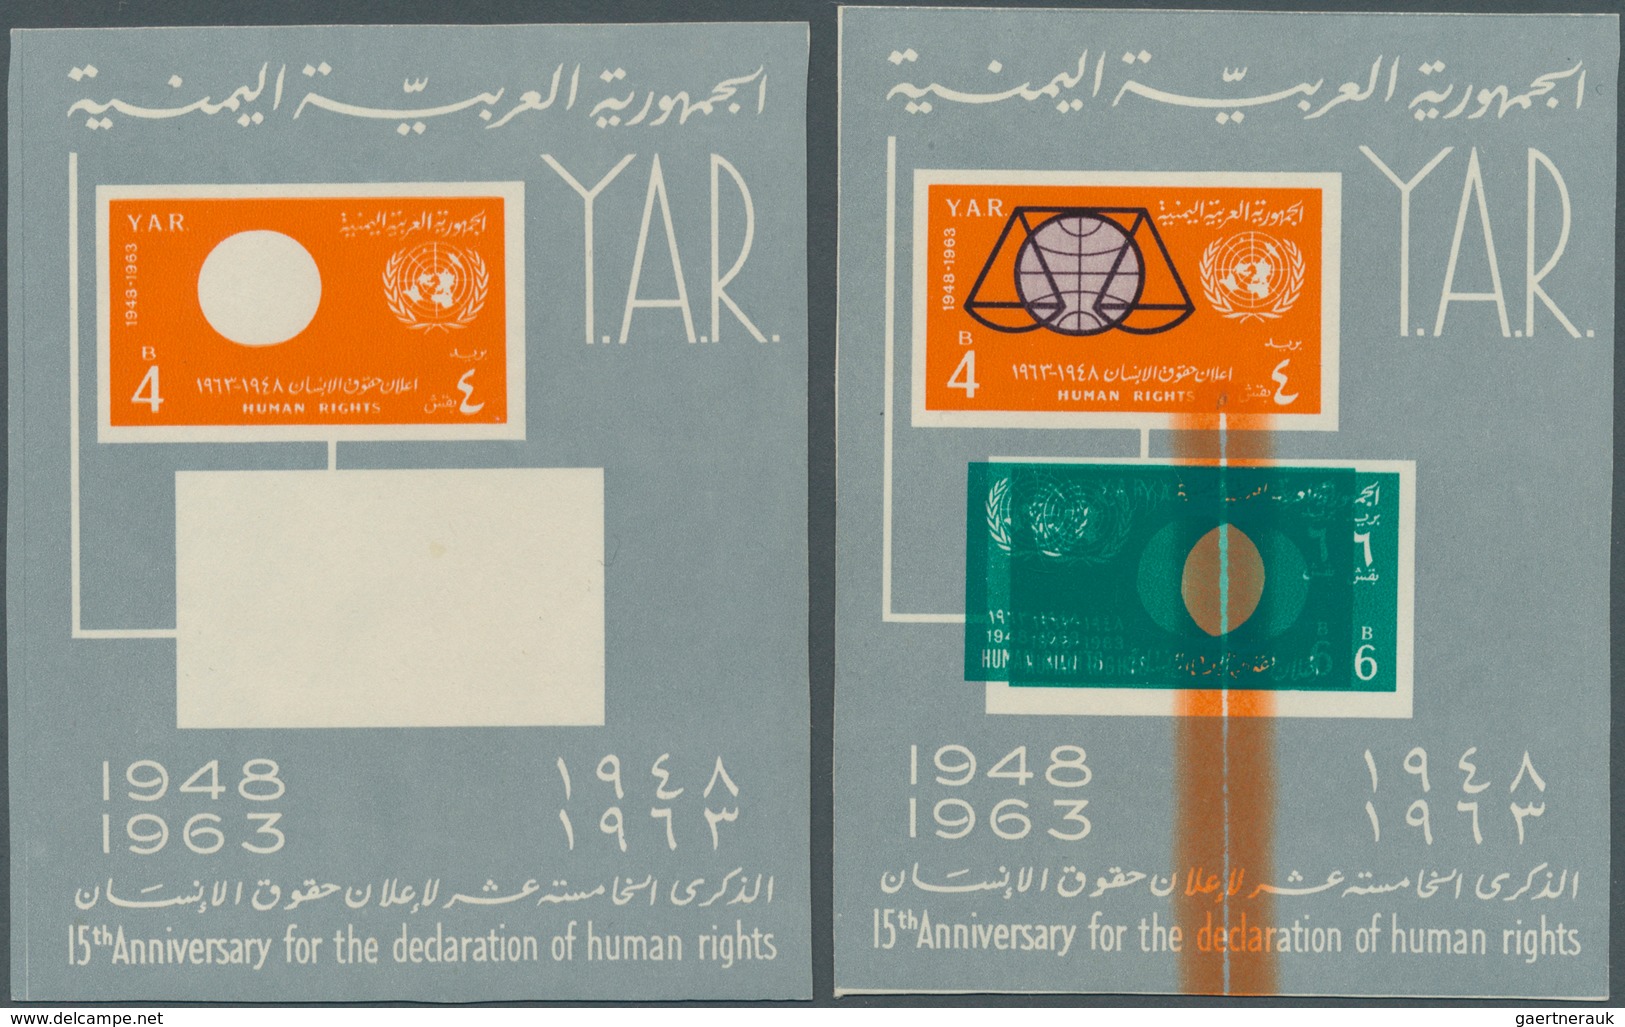 Jemen: 1963, 15th Anniversary of Declaration of Human Rights, group of seven souvenir sheets showing